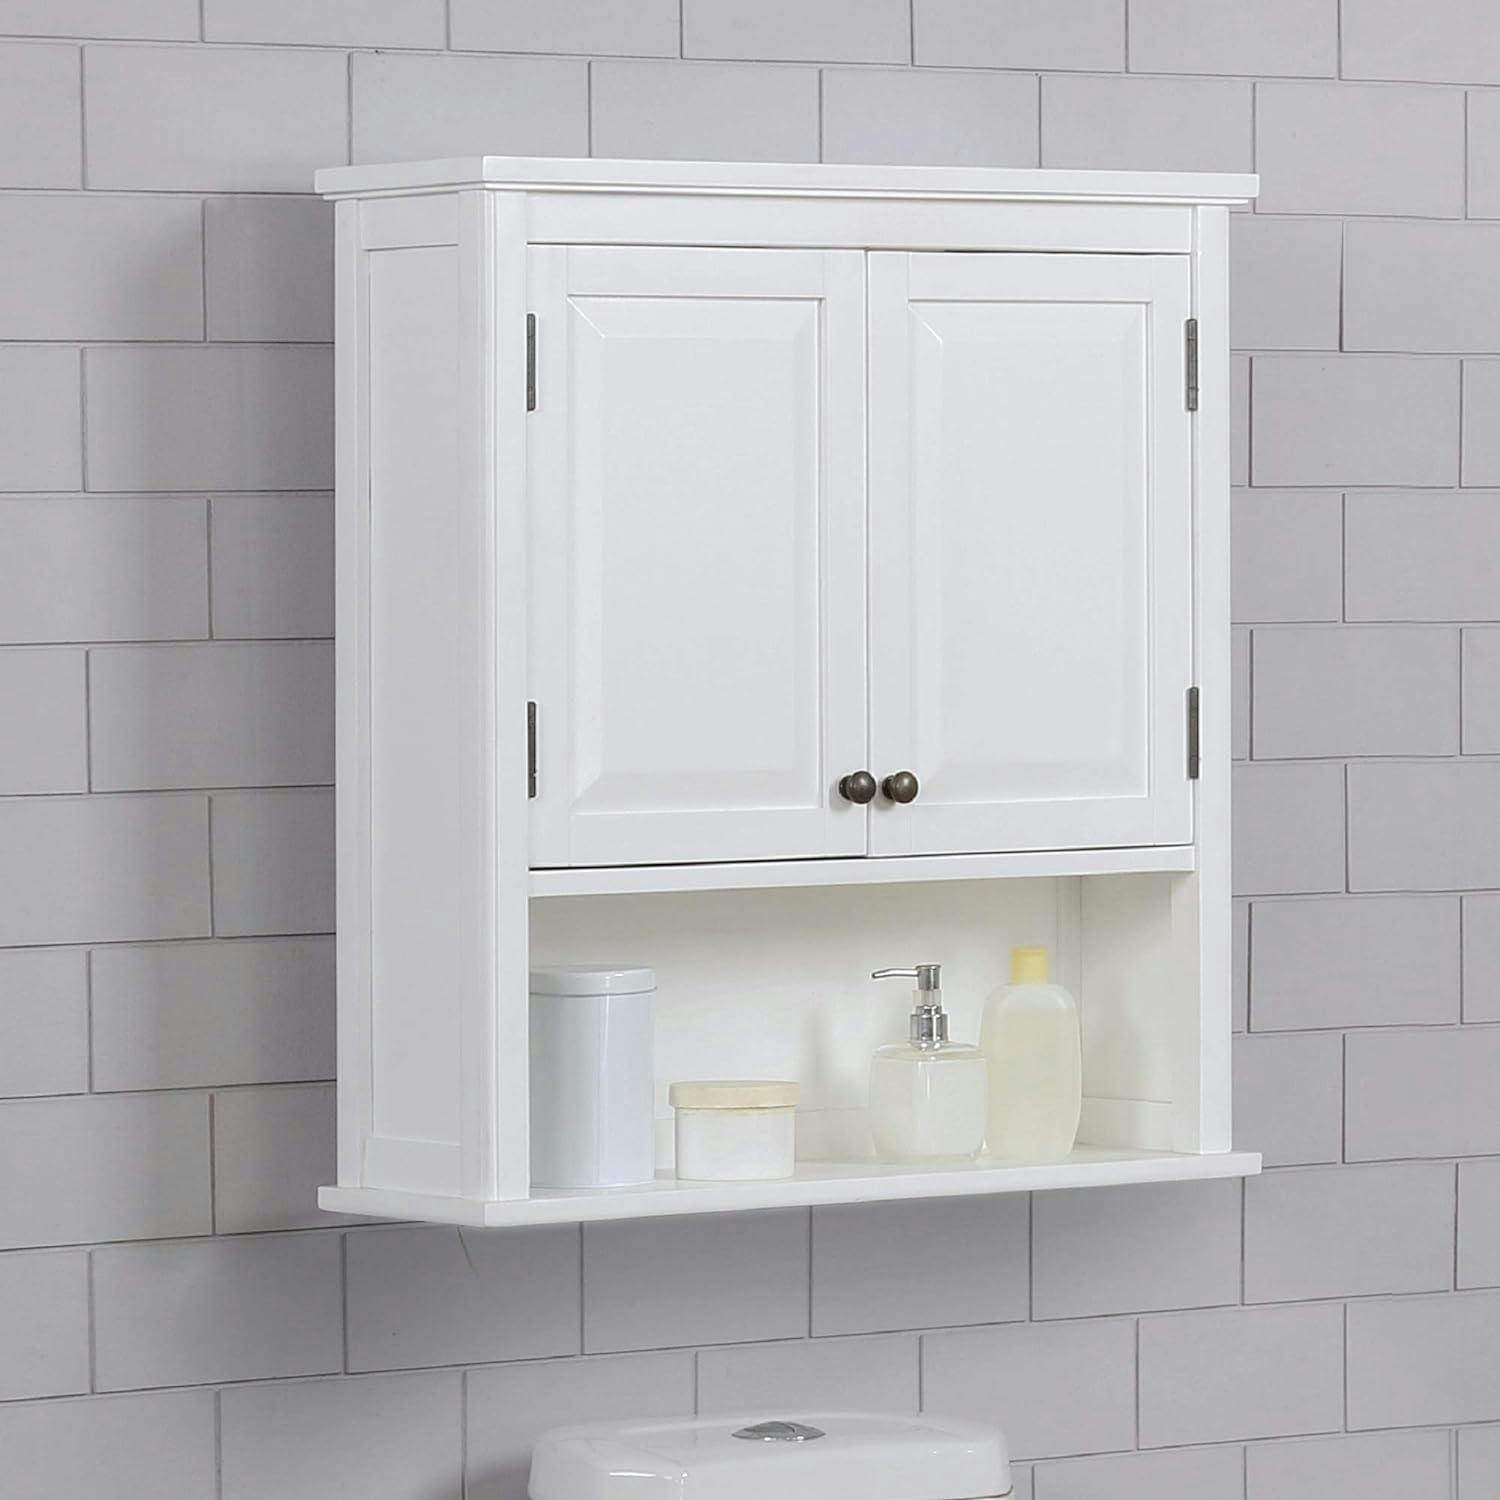 Dorset Elegant White Wall Mounted Bath Storage Cabinet with Glass Doors